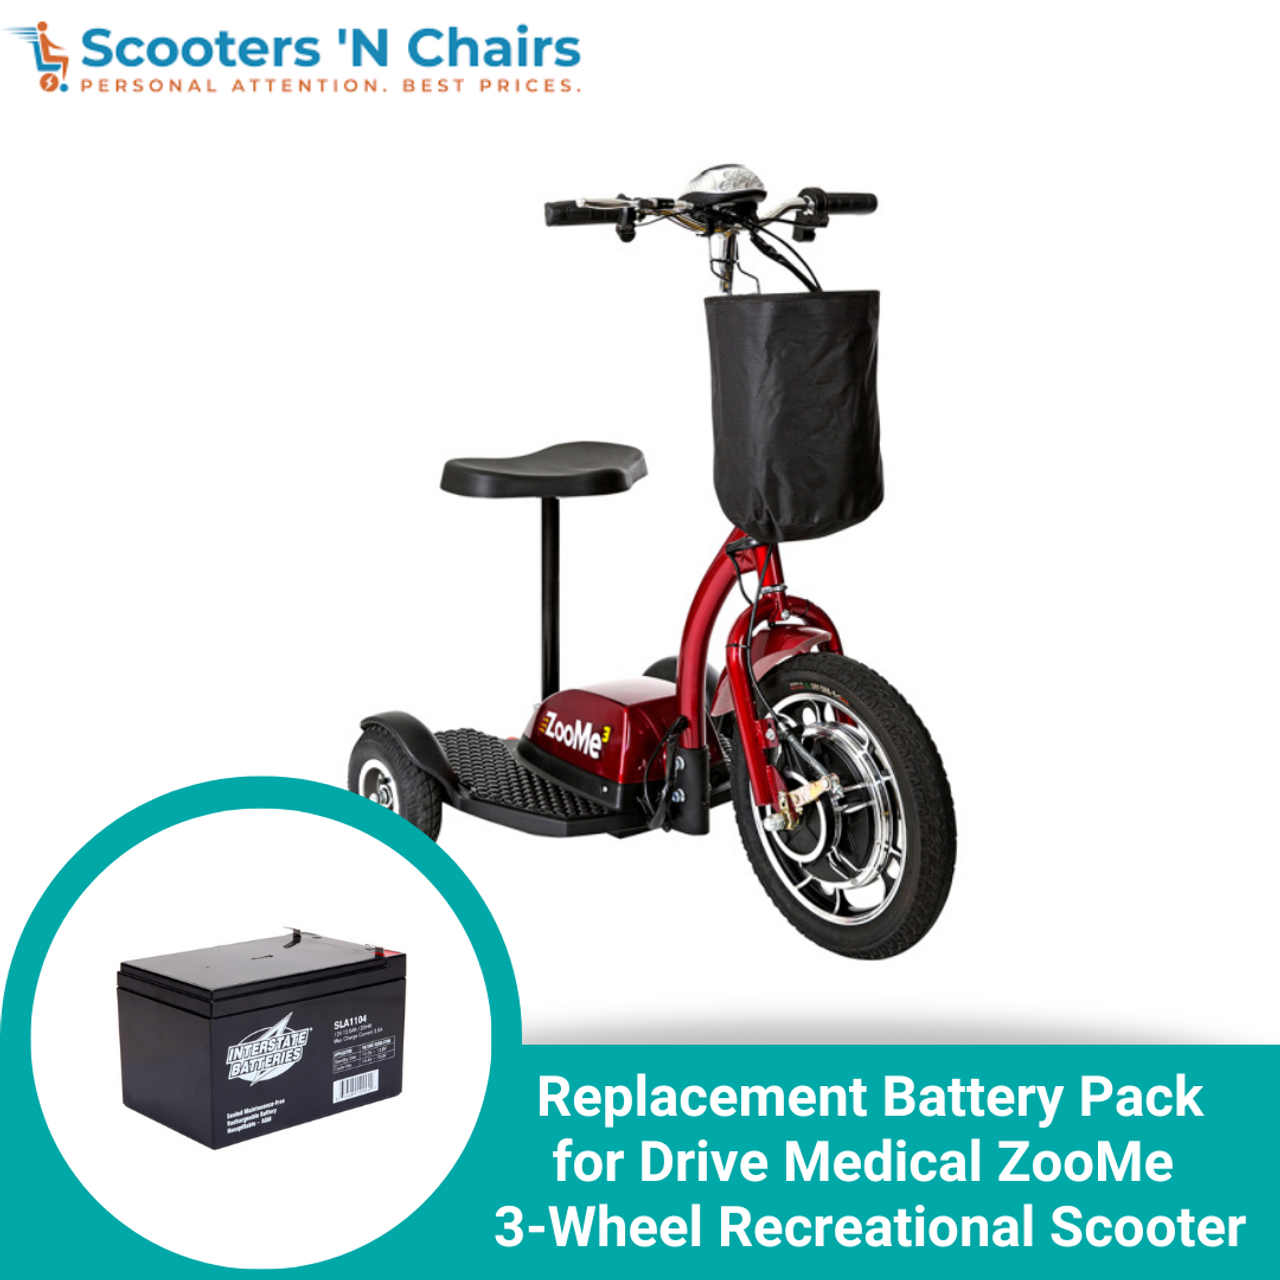 Drive Medical ZooMe 3-Wheel Recreational Scooter Battery Replacement Pack  of 3 - Interstate Batteries 36V 12AH